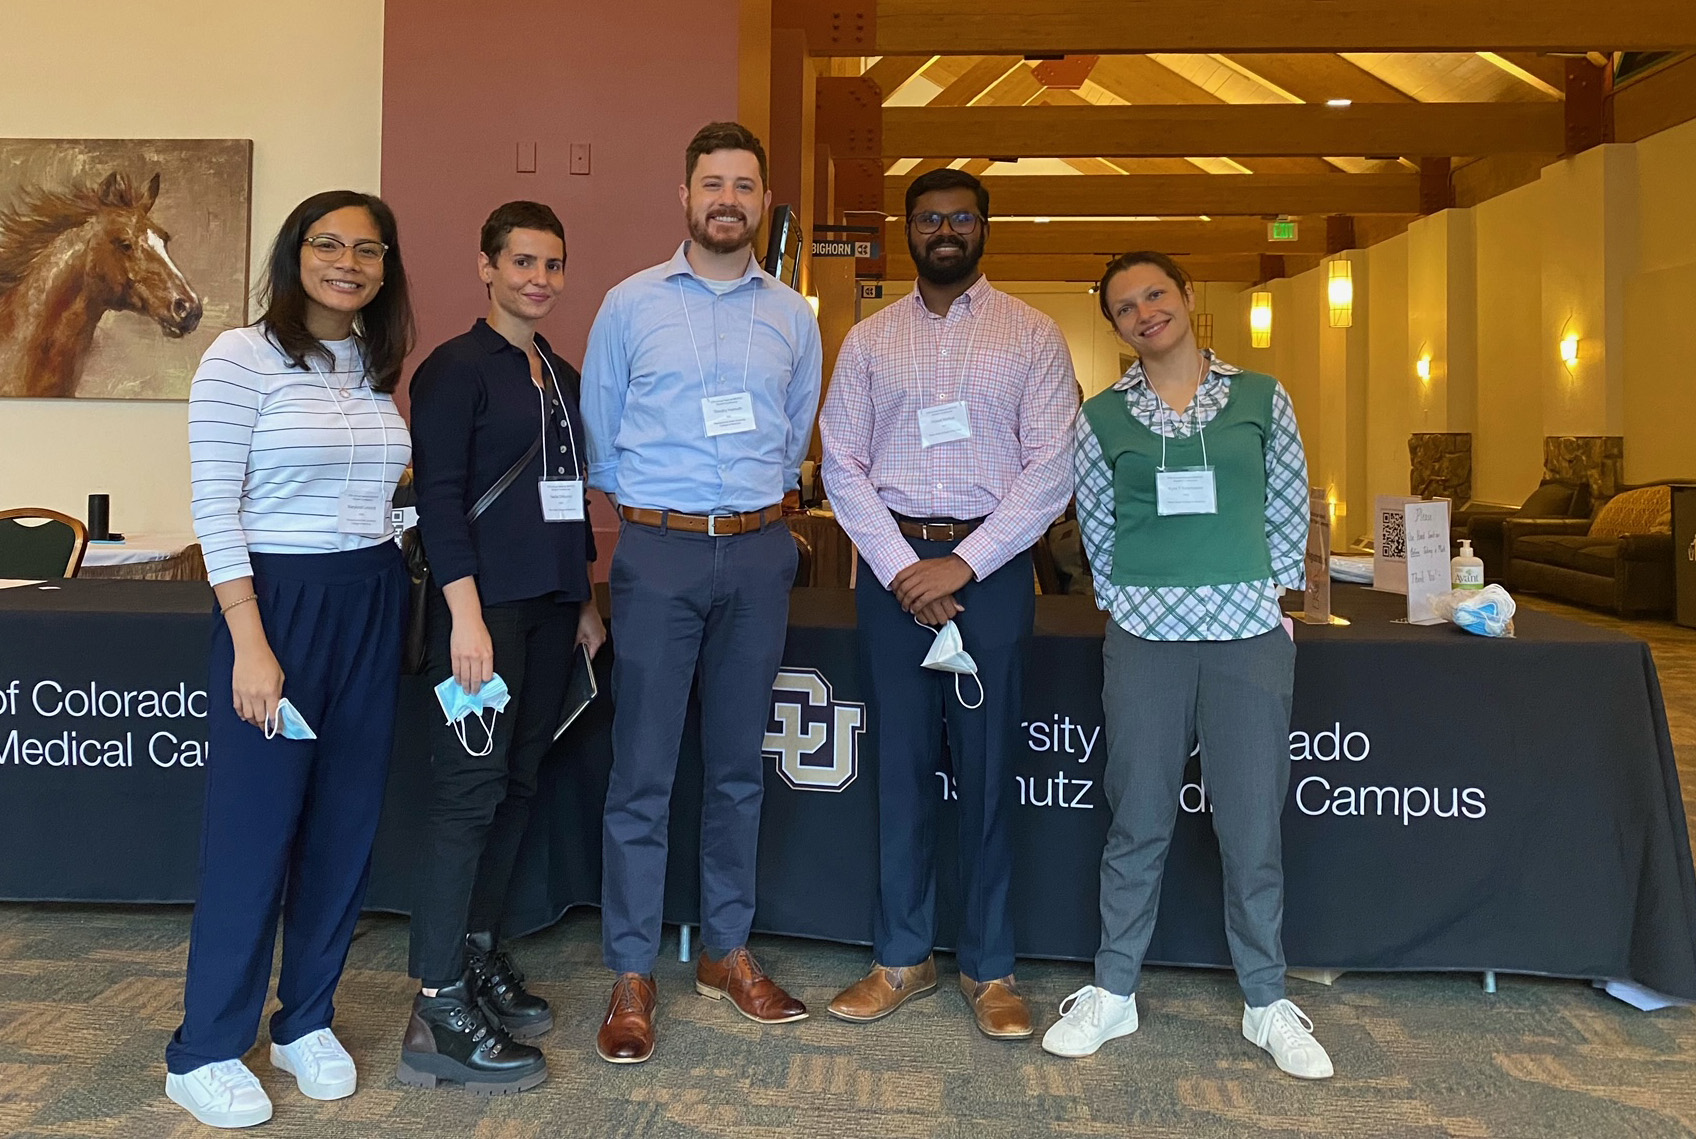 MD/PhD students Maryknoll Linscott, Nadia DiNunno, Tim Helmuth, Havell Markus and Kyra Newmaster pose in a line for a photo inside a conference building.